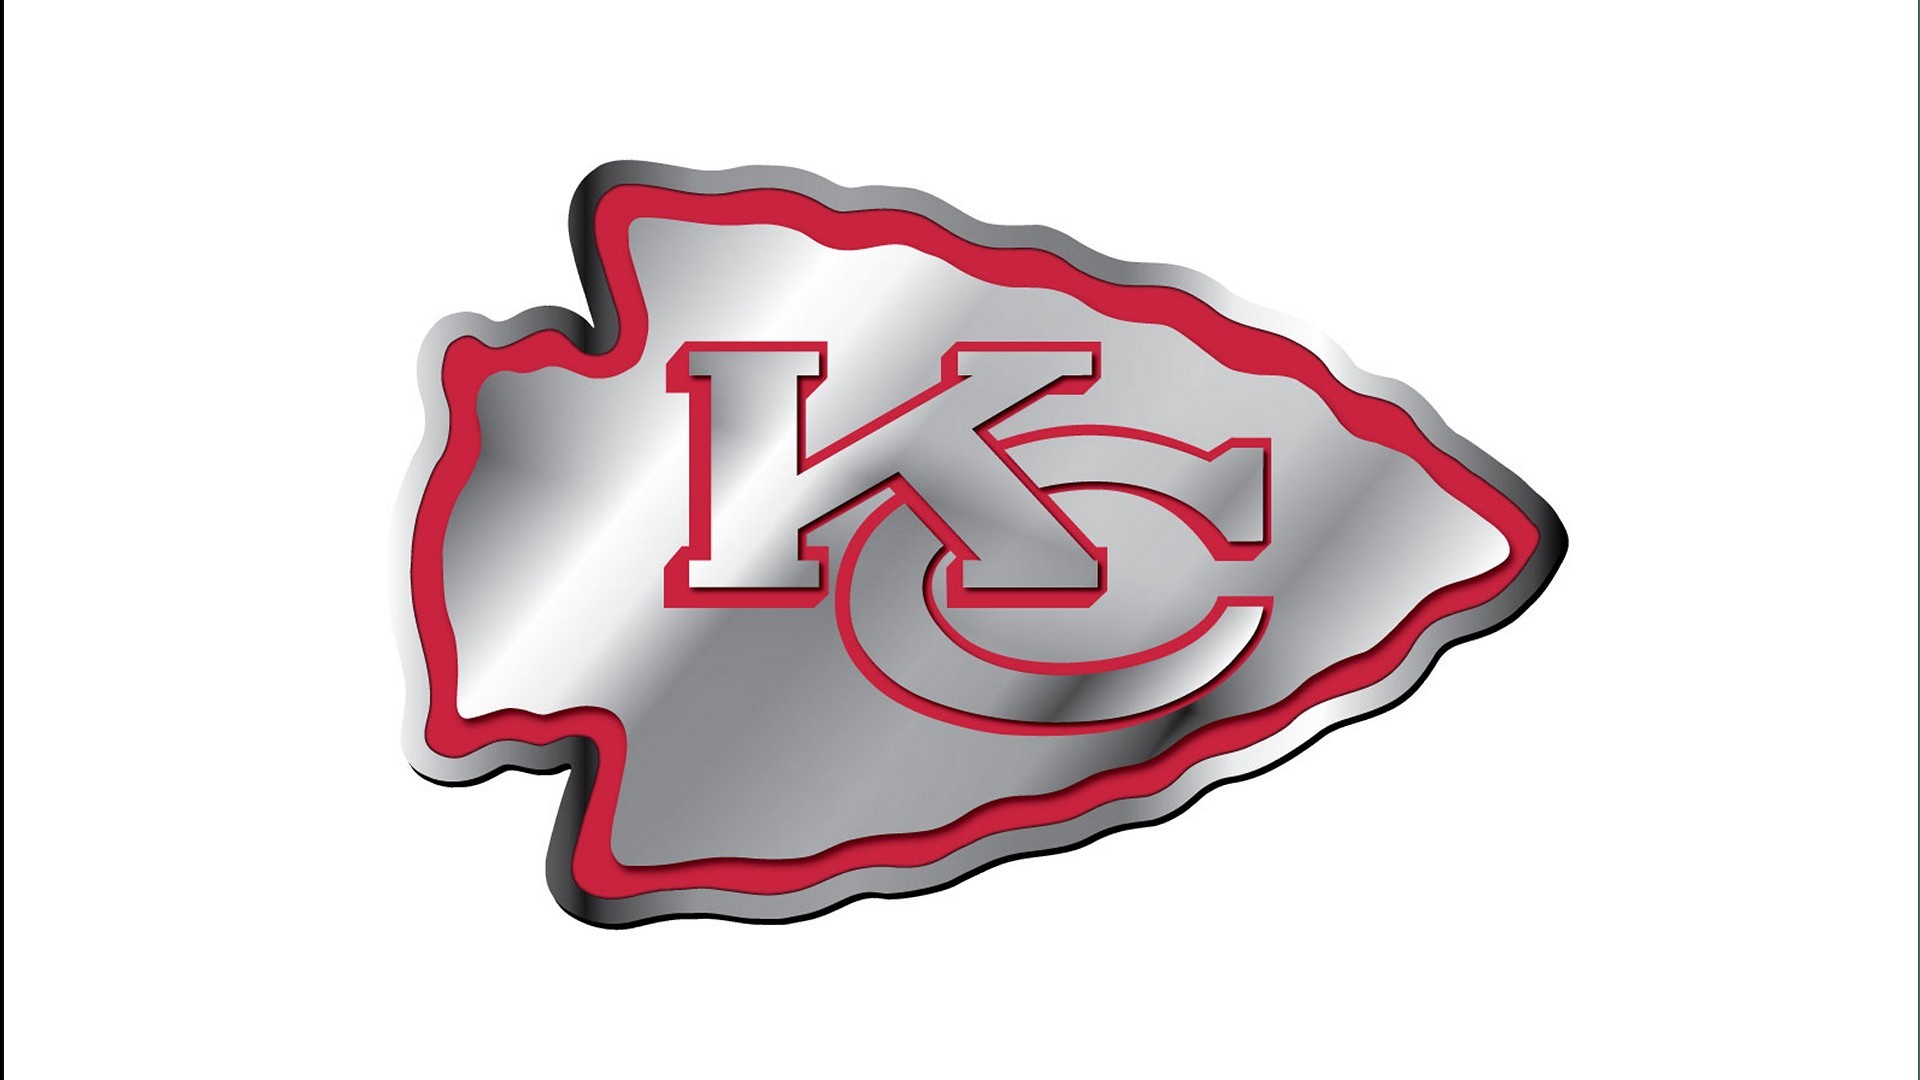 Wallpaper Desktop Kansas City Chiefs NFL HD With high-resolution 1920X1080 pixel. You can use this wallpaper for your Mac or Windows Desktop Background, iPhone, Android or Tablet and another Smartphone device